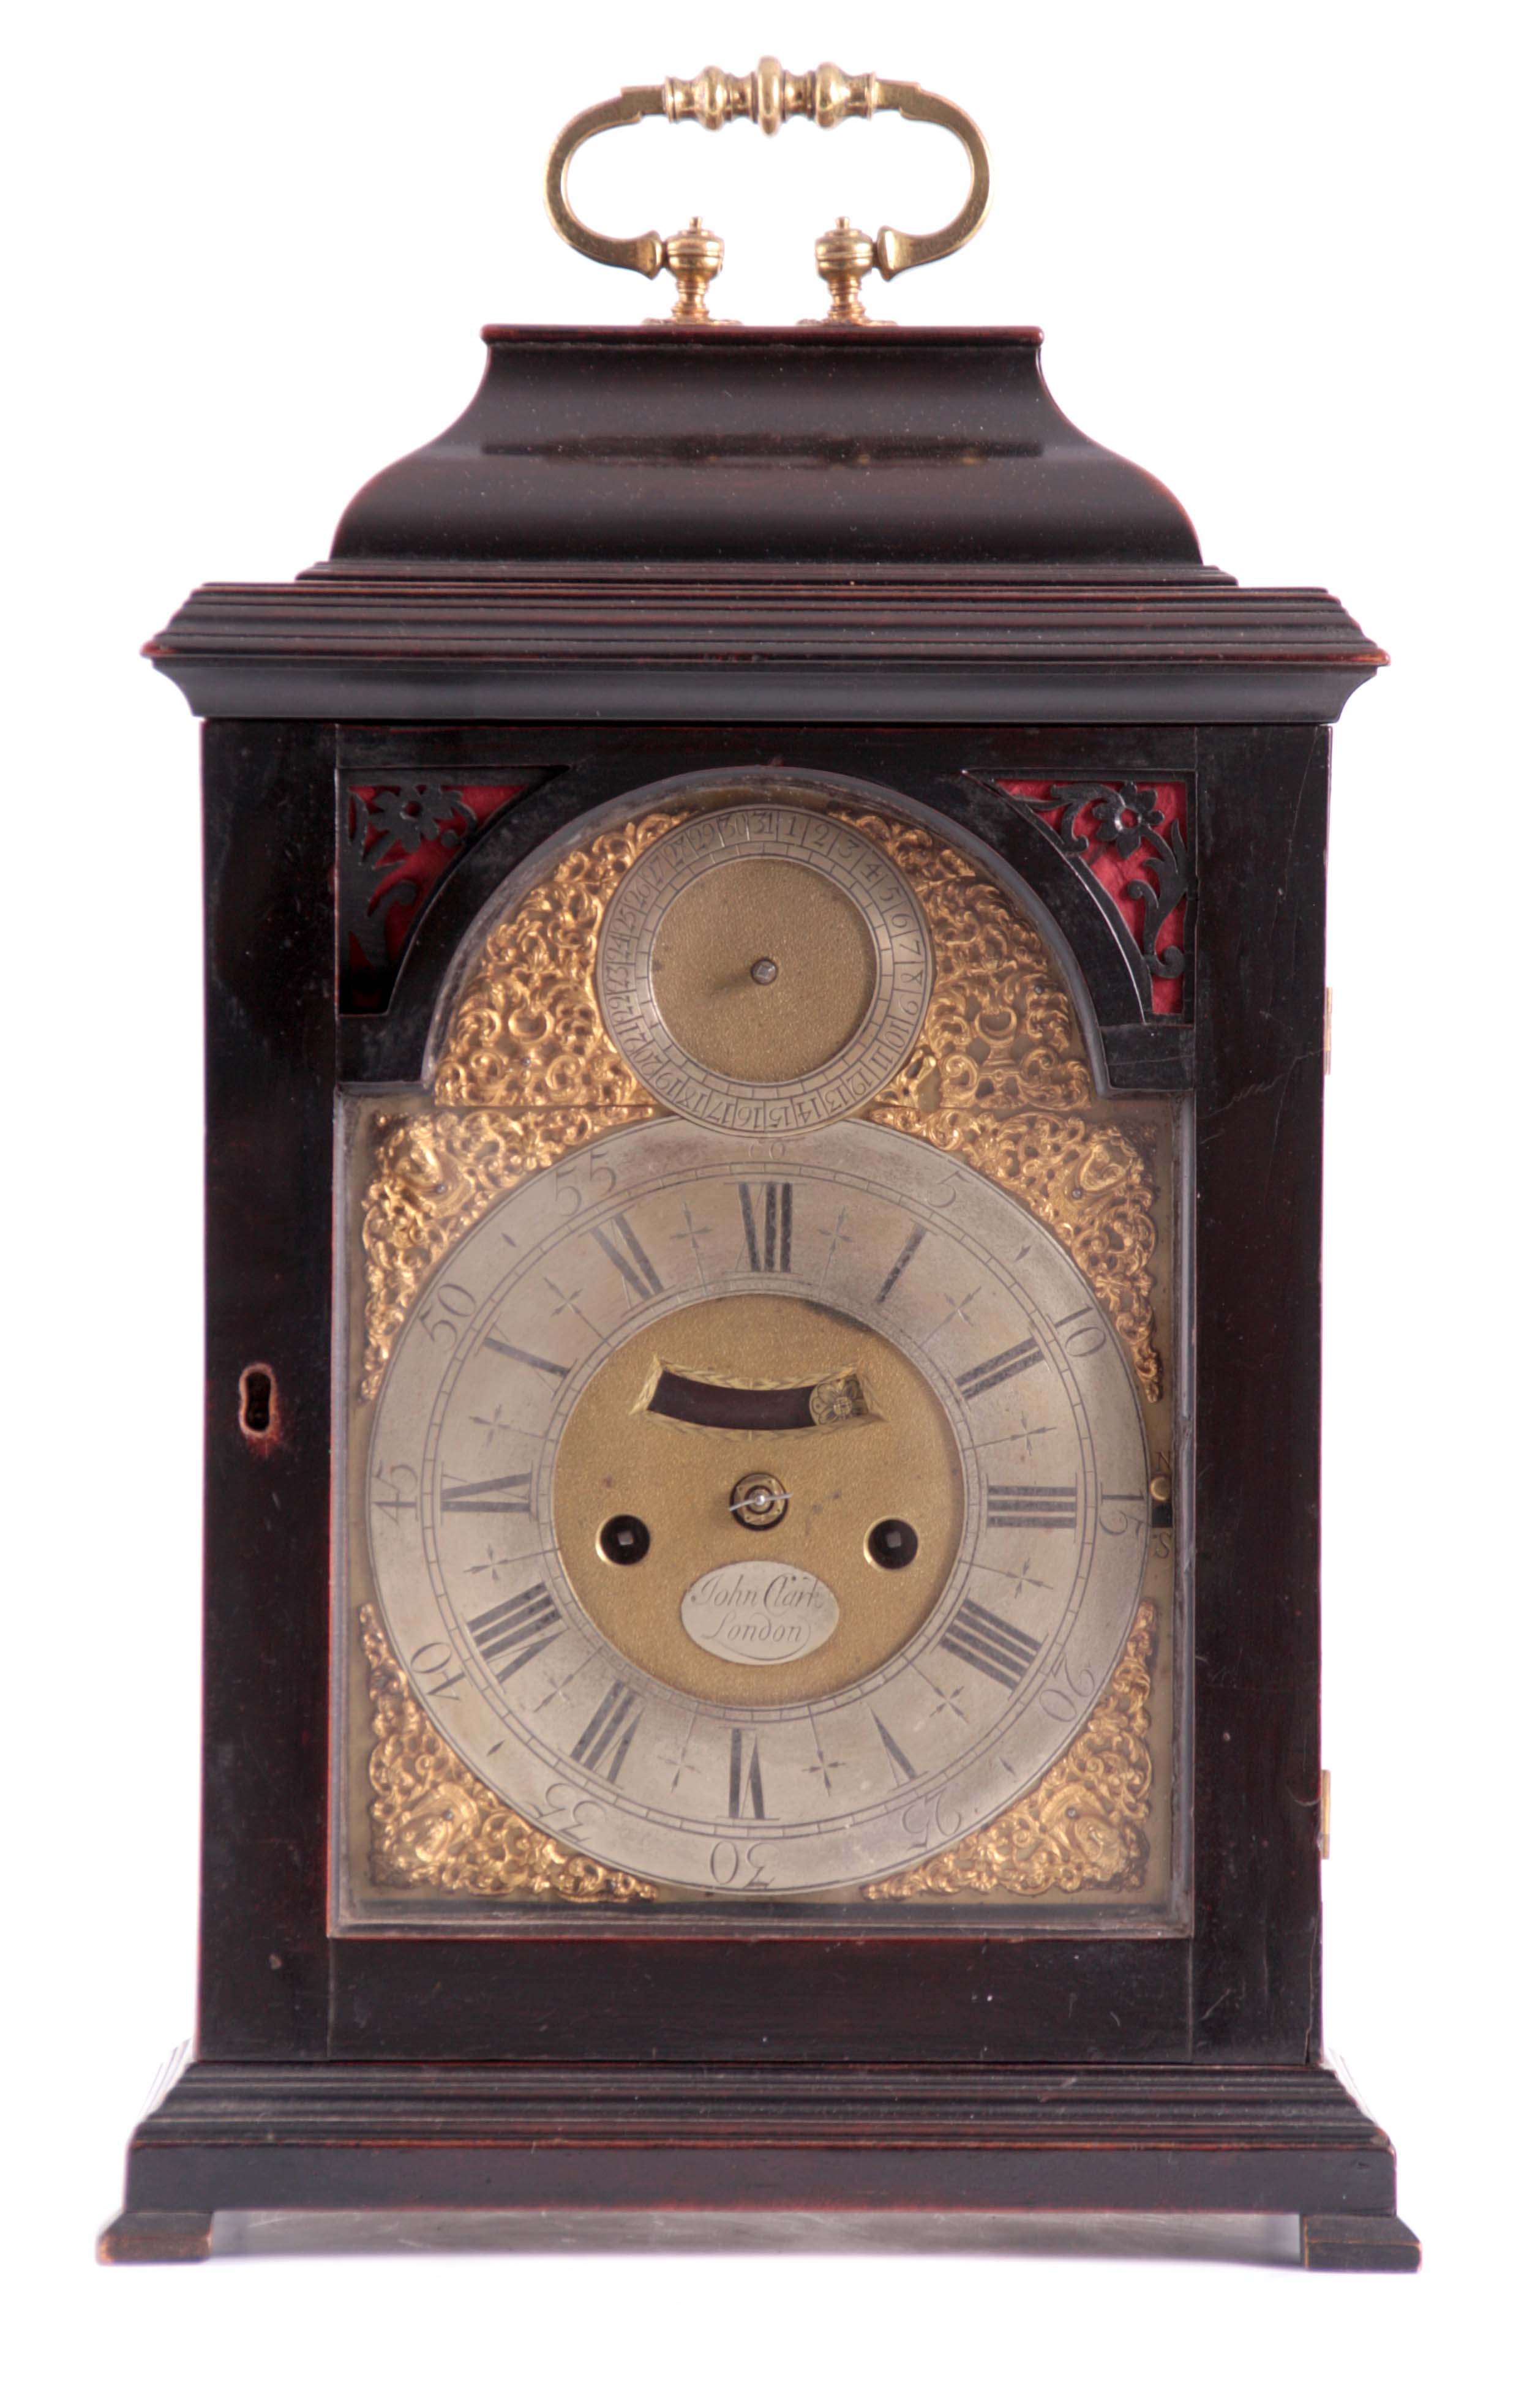 JOHN. CLARK, LONDON. AN EARLY 18TH CENTURY EBONISED BRACKET CLOCK the case with inverted bell top